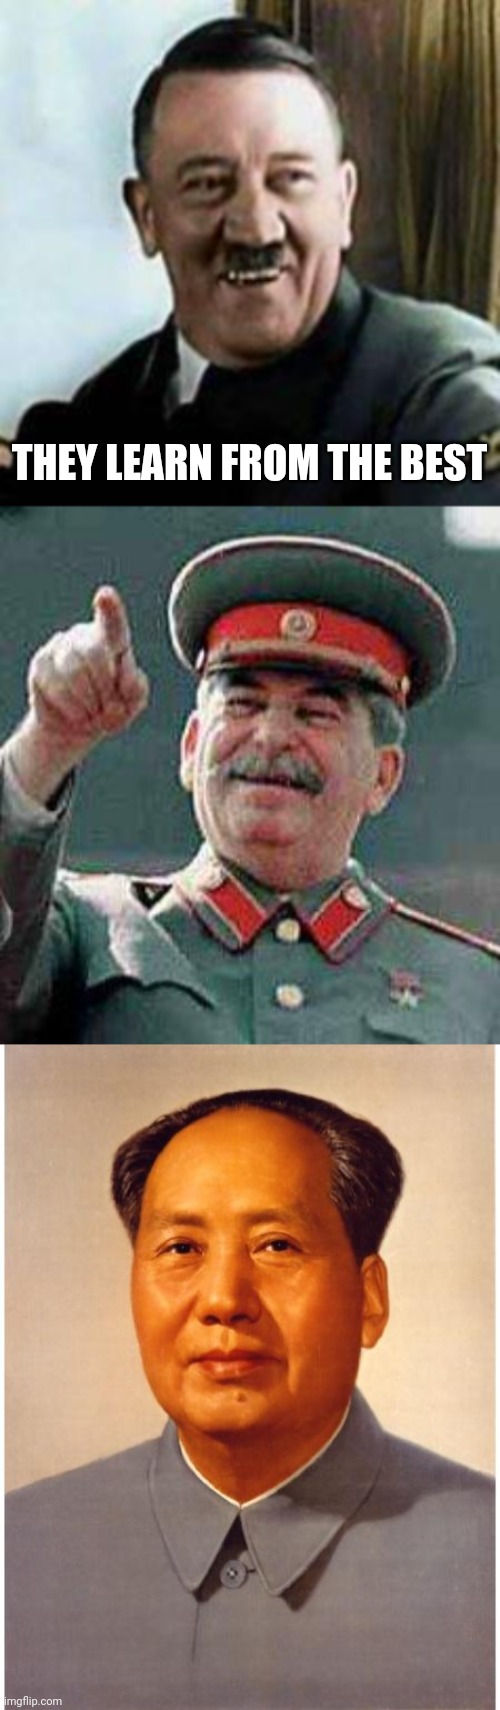 THEY LEARN FROM THE BEST | image tagged in laughing hitler,stalin says,chairman mao | made w/ Imgflip meme maker